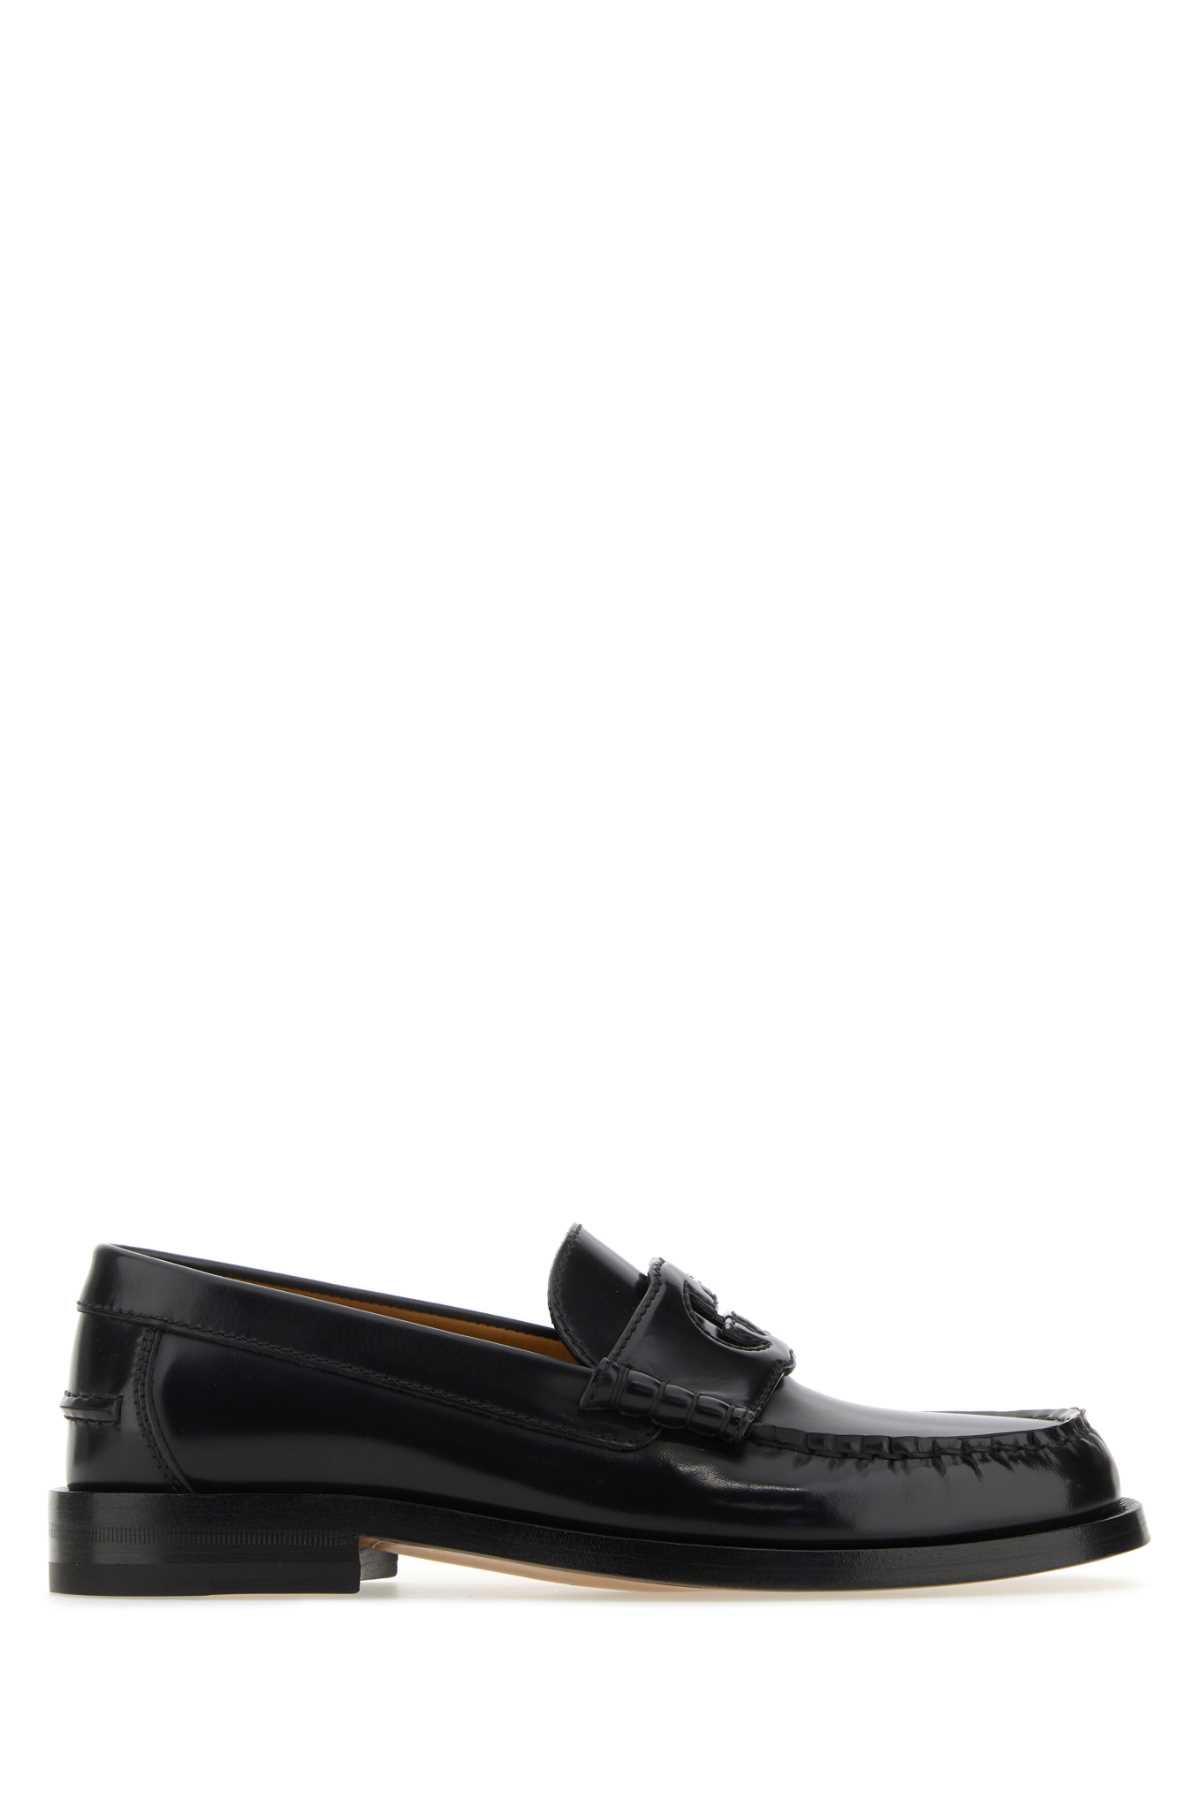 Gucci Black Leather Loafers